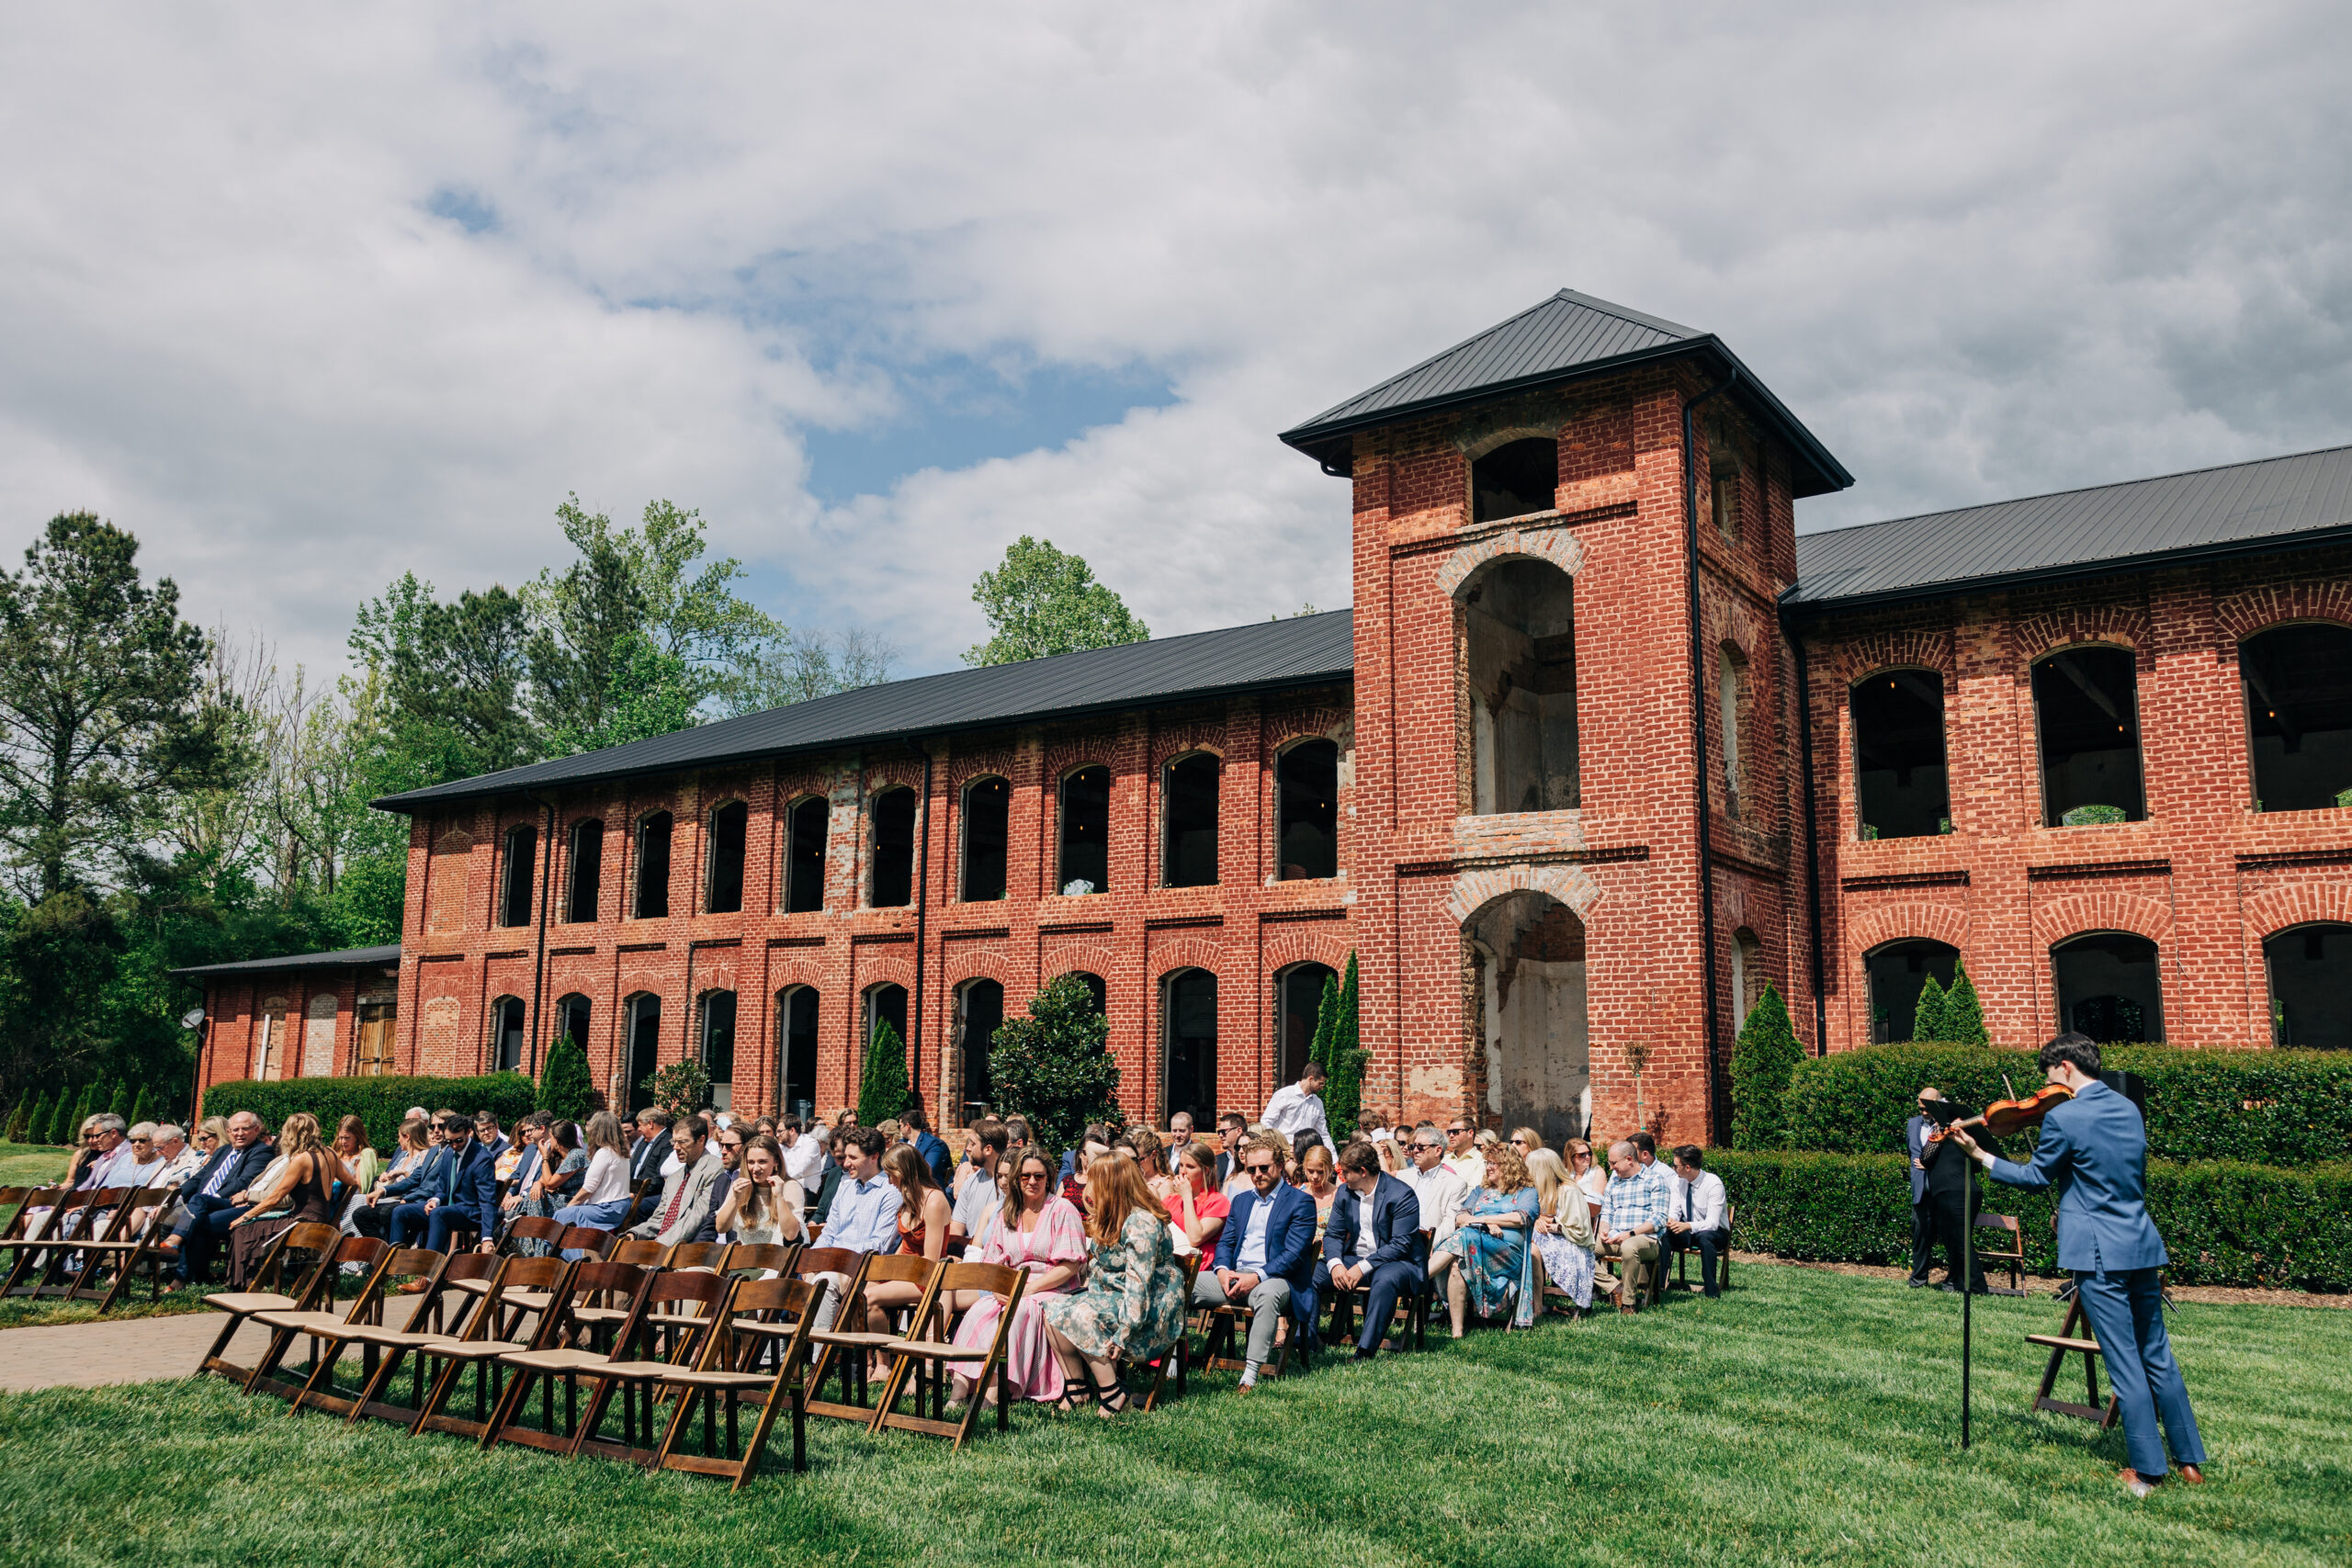 A view of a violin player performing as guests wait for an outdoor Providence Cotton Mill wedding ceremony to start